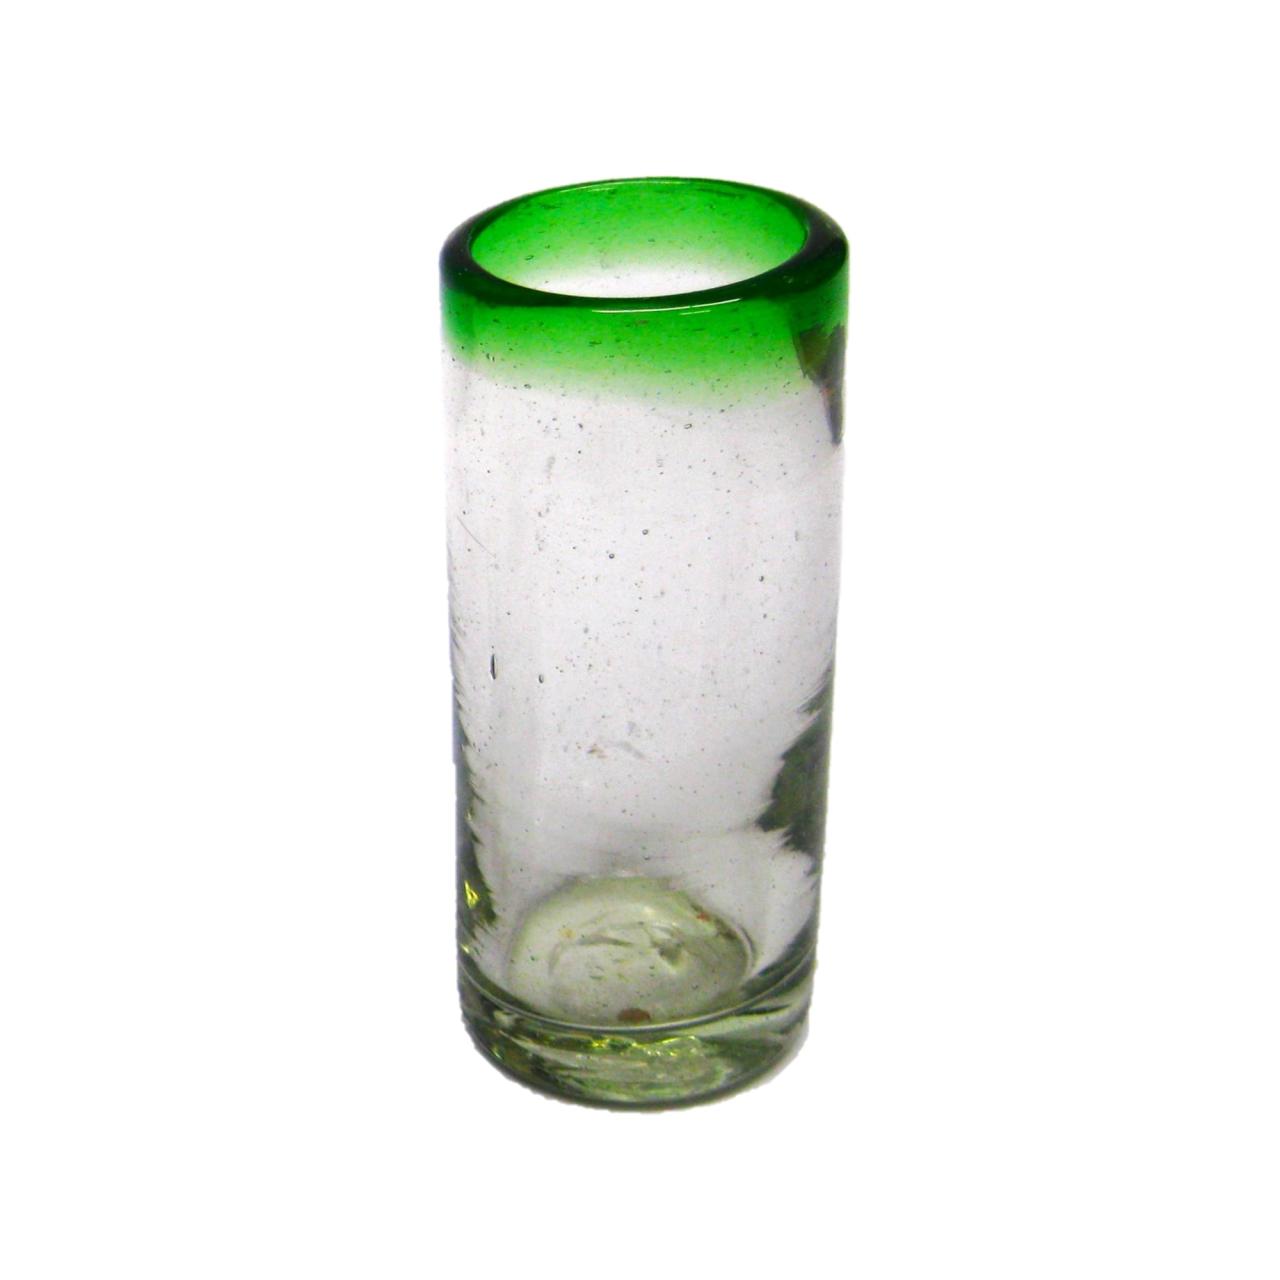 Tequila Shot Glasses / Emerald Green Rim 2 oz Tequila Shot Glasses (set of 6) / These shot glasses bordered in emerald green are perfect for sipping your favourite tequila or any other liquor.